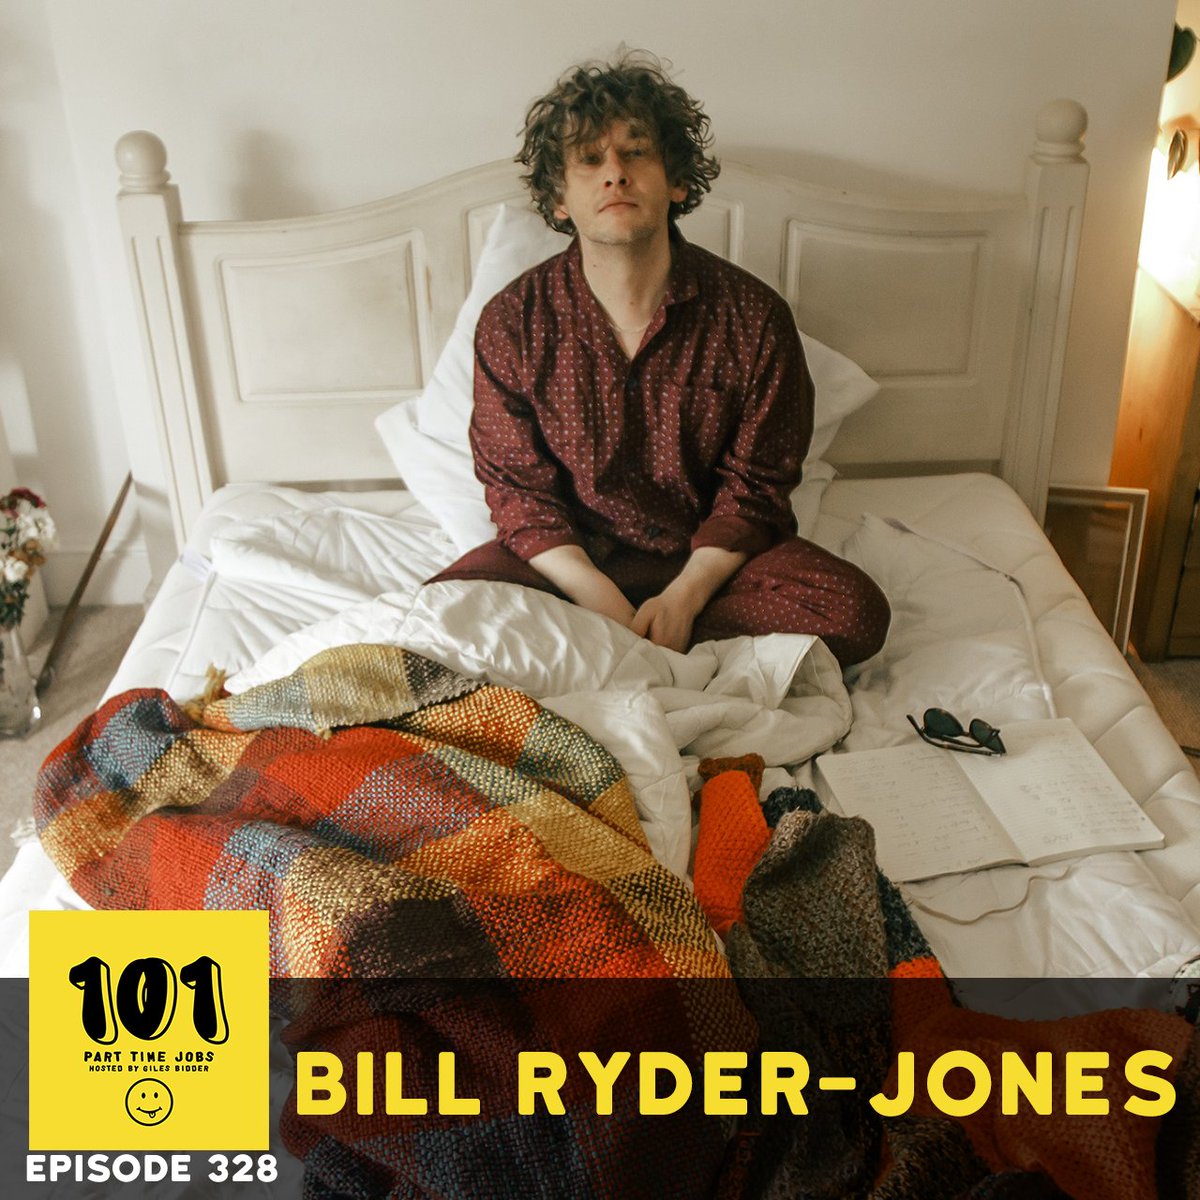 One of today's great songwriters, Bill Ryder-Jones talks writer's block, pub communities and producing. His excellent new album Iechyd Da is out now on Domino. Listen to the episode at linktr.ee/101parttimejobs Photo: Marieke Macklon